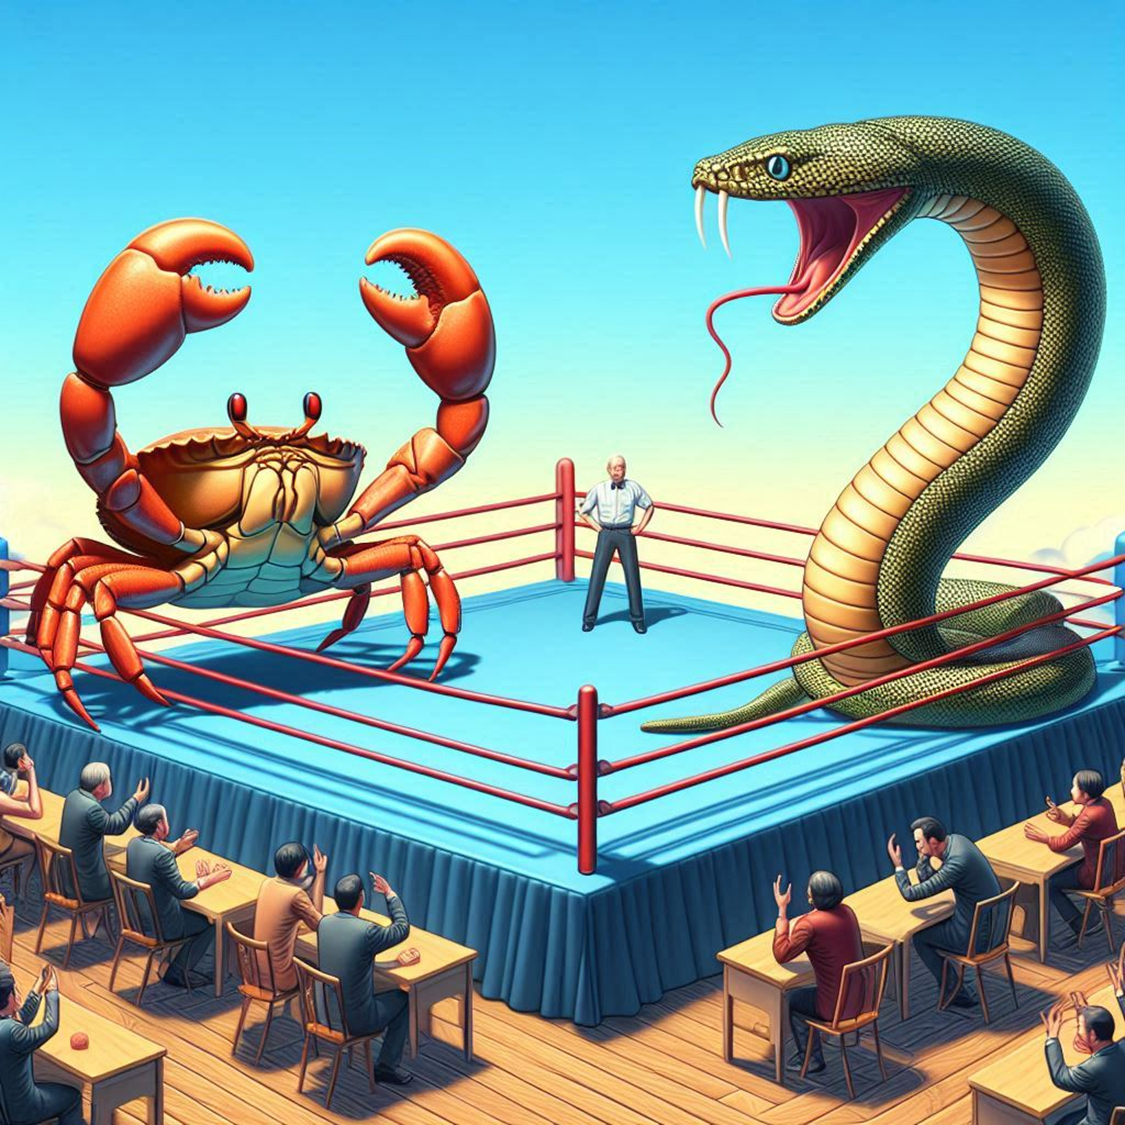 AI generated image of a Python and a Crab in a boxing ring - courtesy of DALL-E.